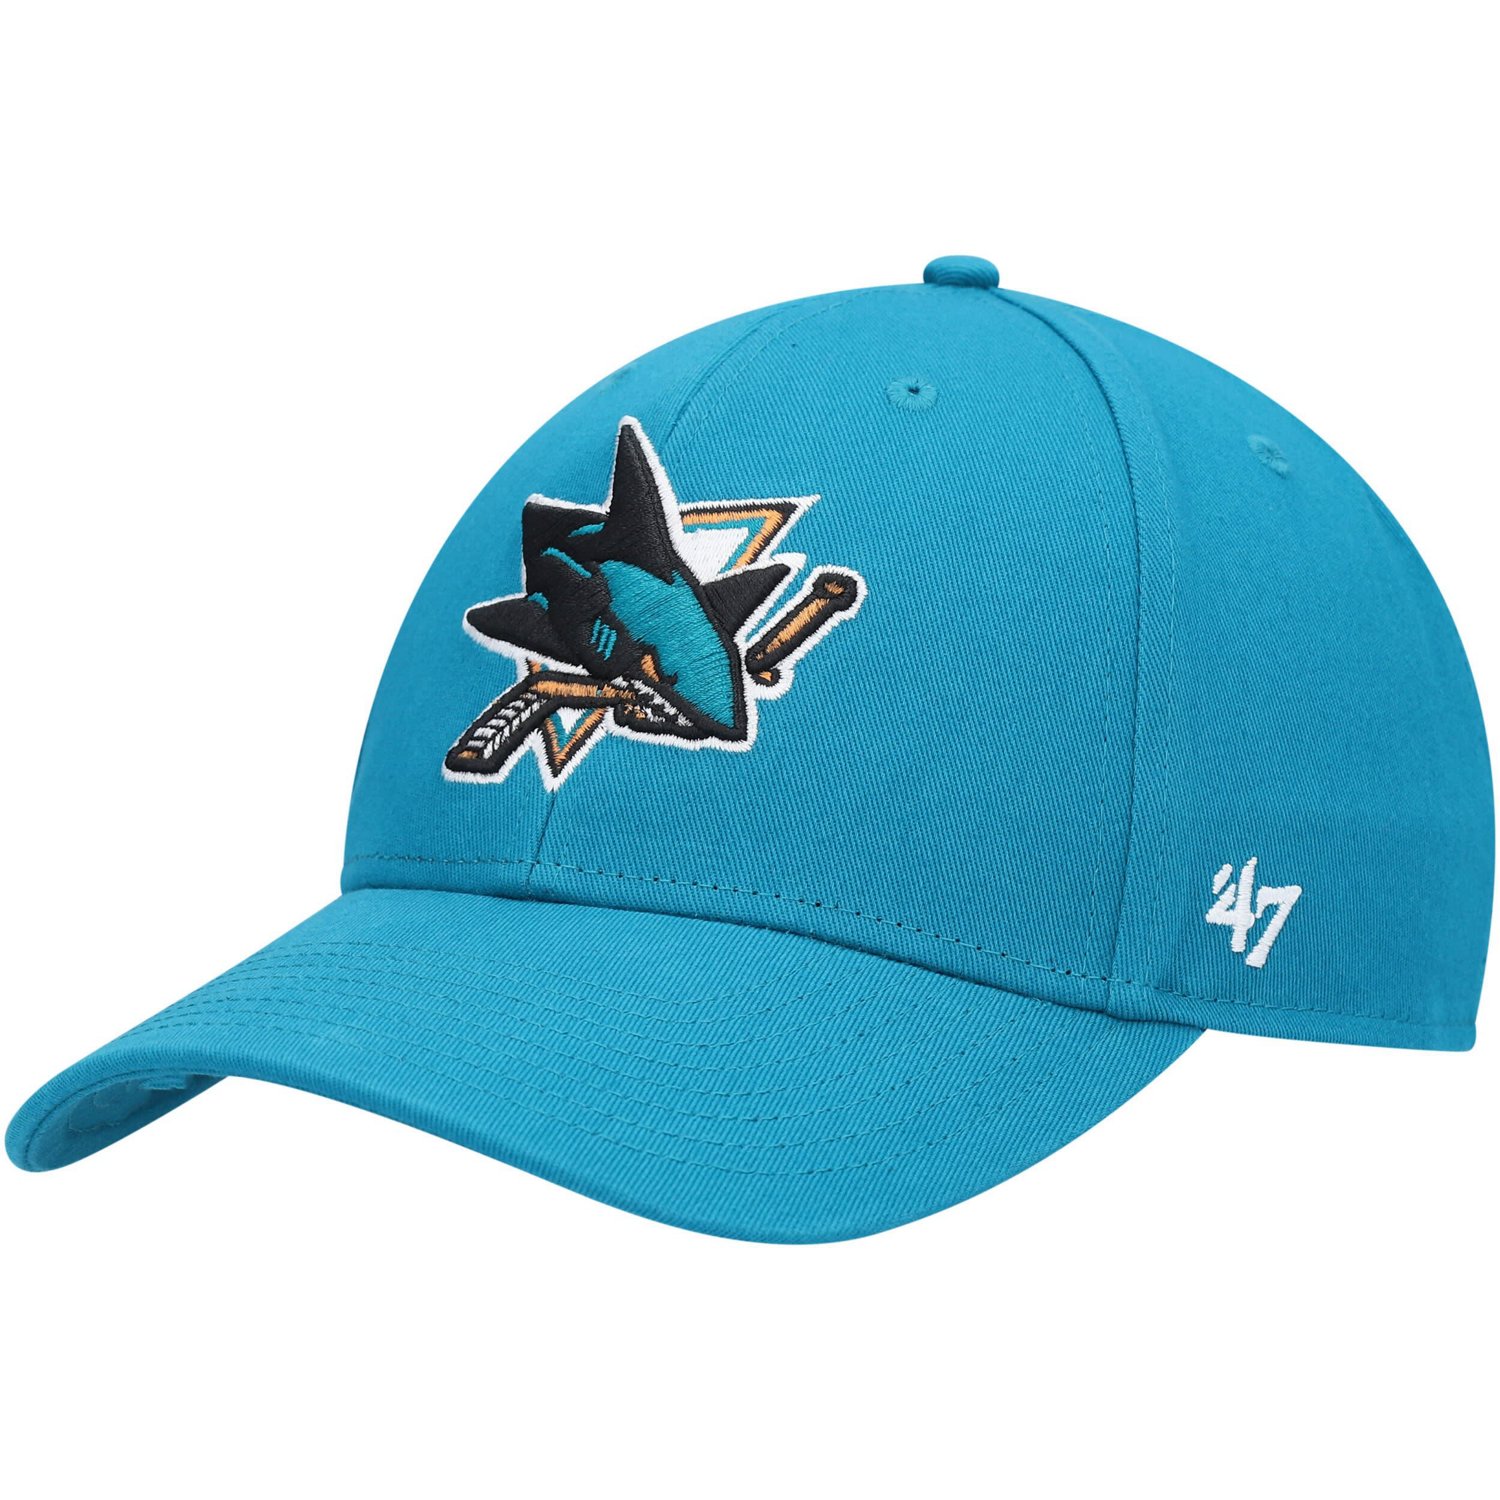 https://academy.scene7.com/is/image/academy//headwear/47-san-jose-sharks-legend-mvp-adjustable-hat-h-gwmvp22gws-dt-blue/4a36c21bb46441a2ab26cc0abe22439b?$pdp-mobile-gallery-ng$